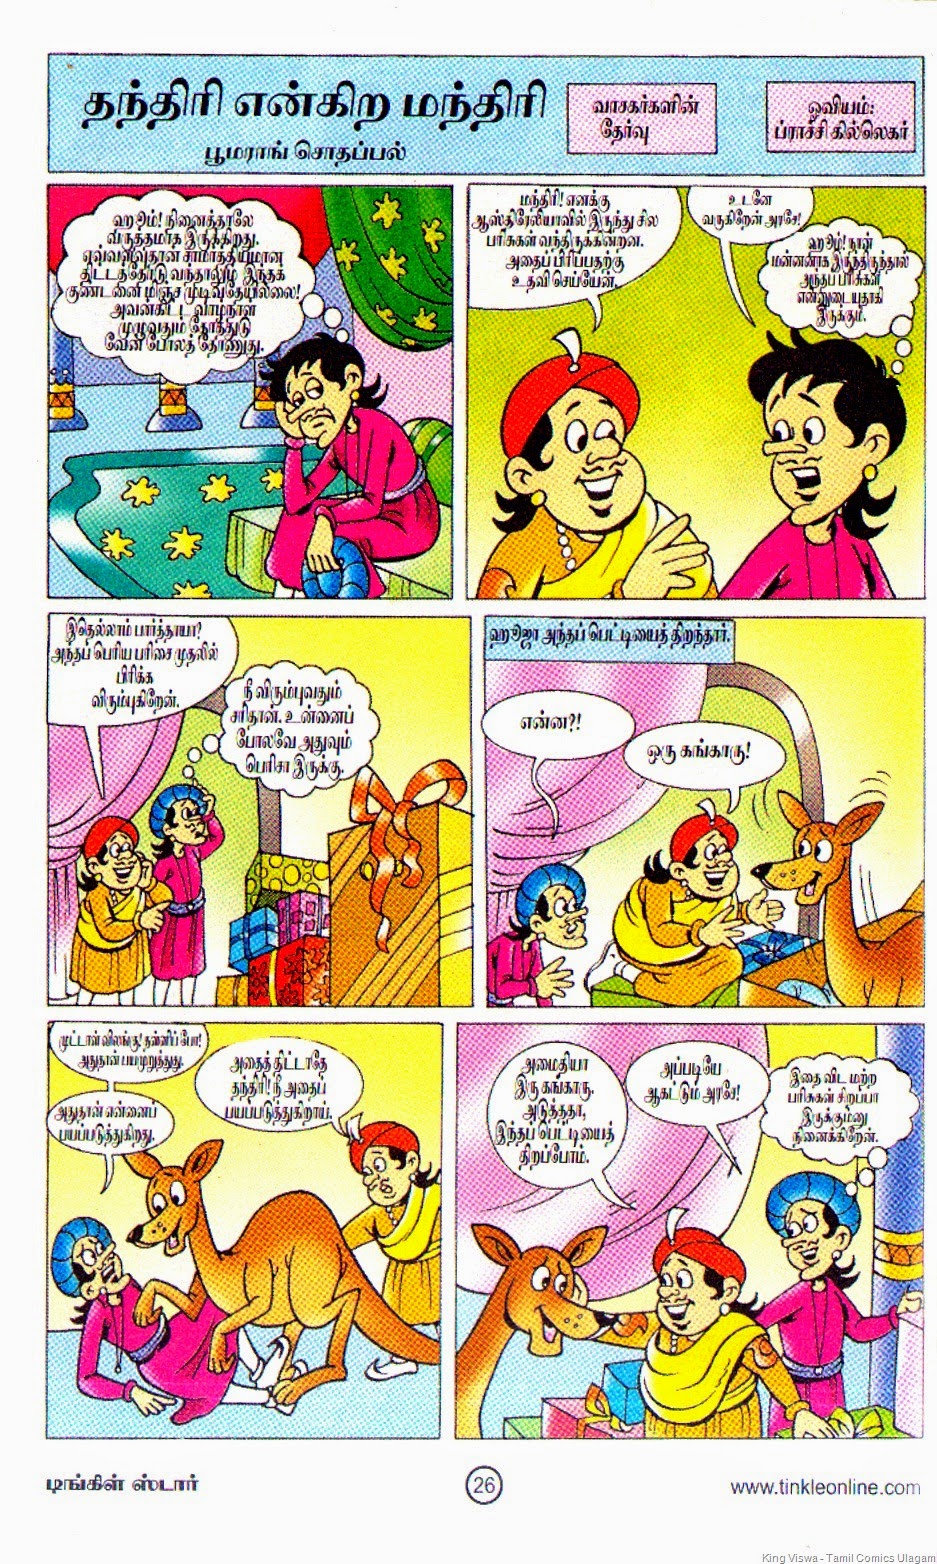 [Tinkle%2520Stars%2520Issue%2520No%25201%2520Dated%252001122014%2520Tantri%2520The%2520Mantri%2520Story%2520Page%2520No%252026%255B4%255D.jpg]